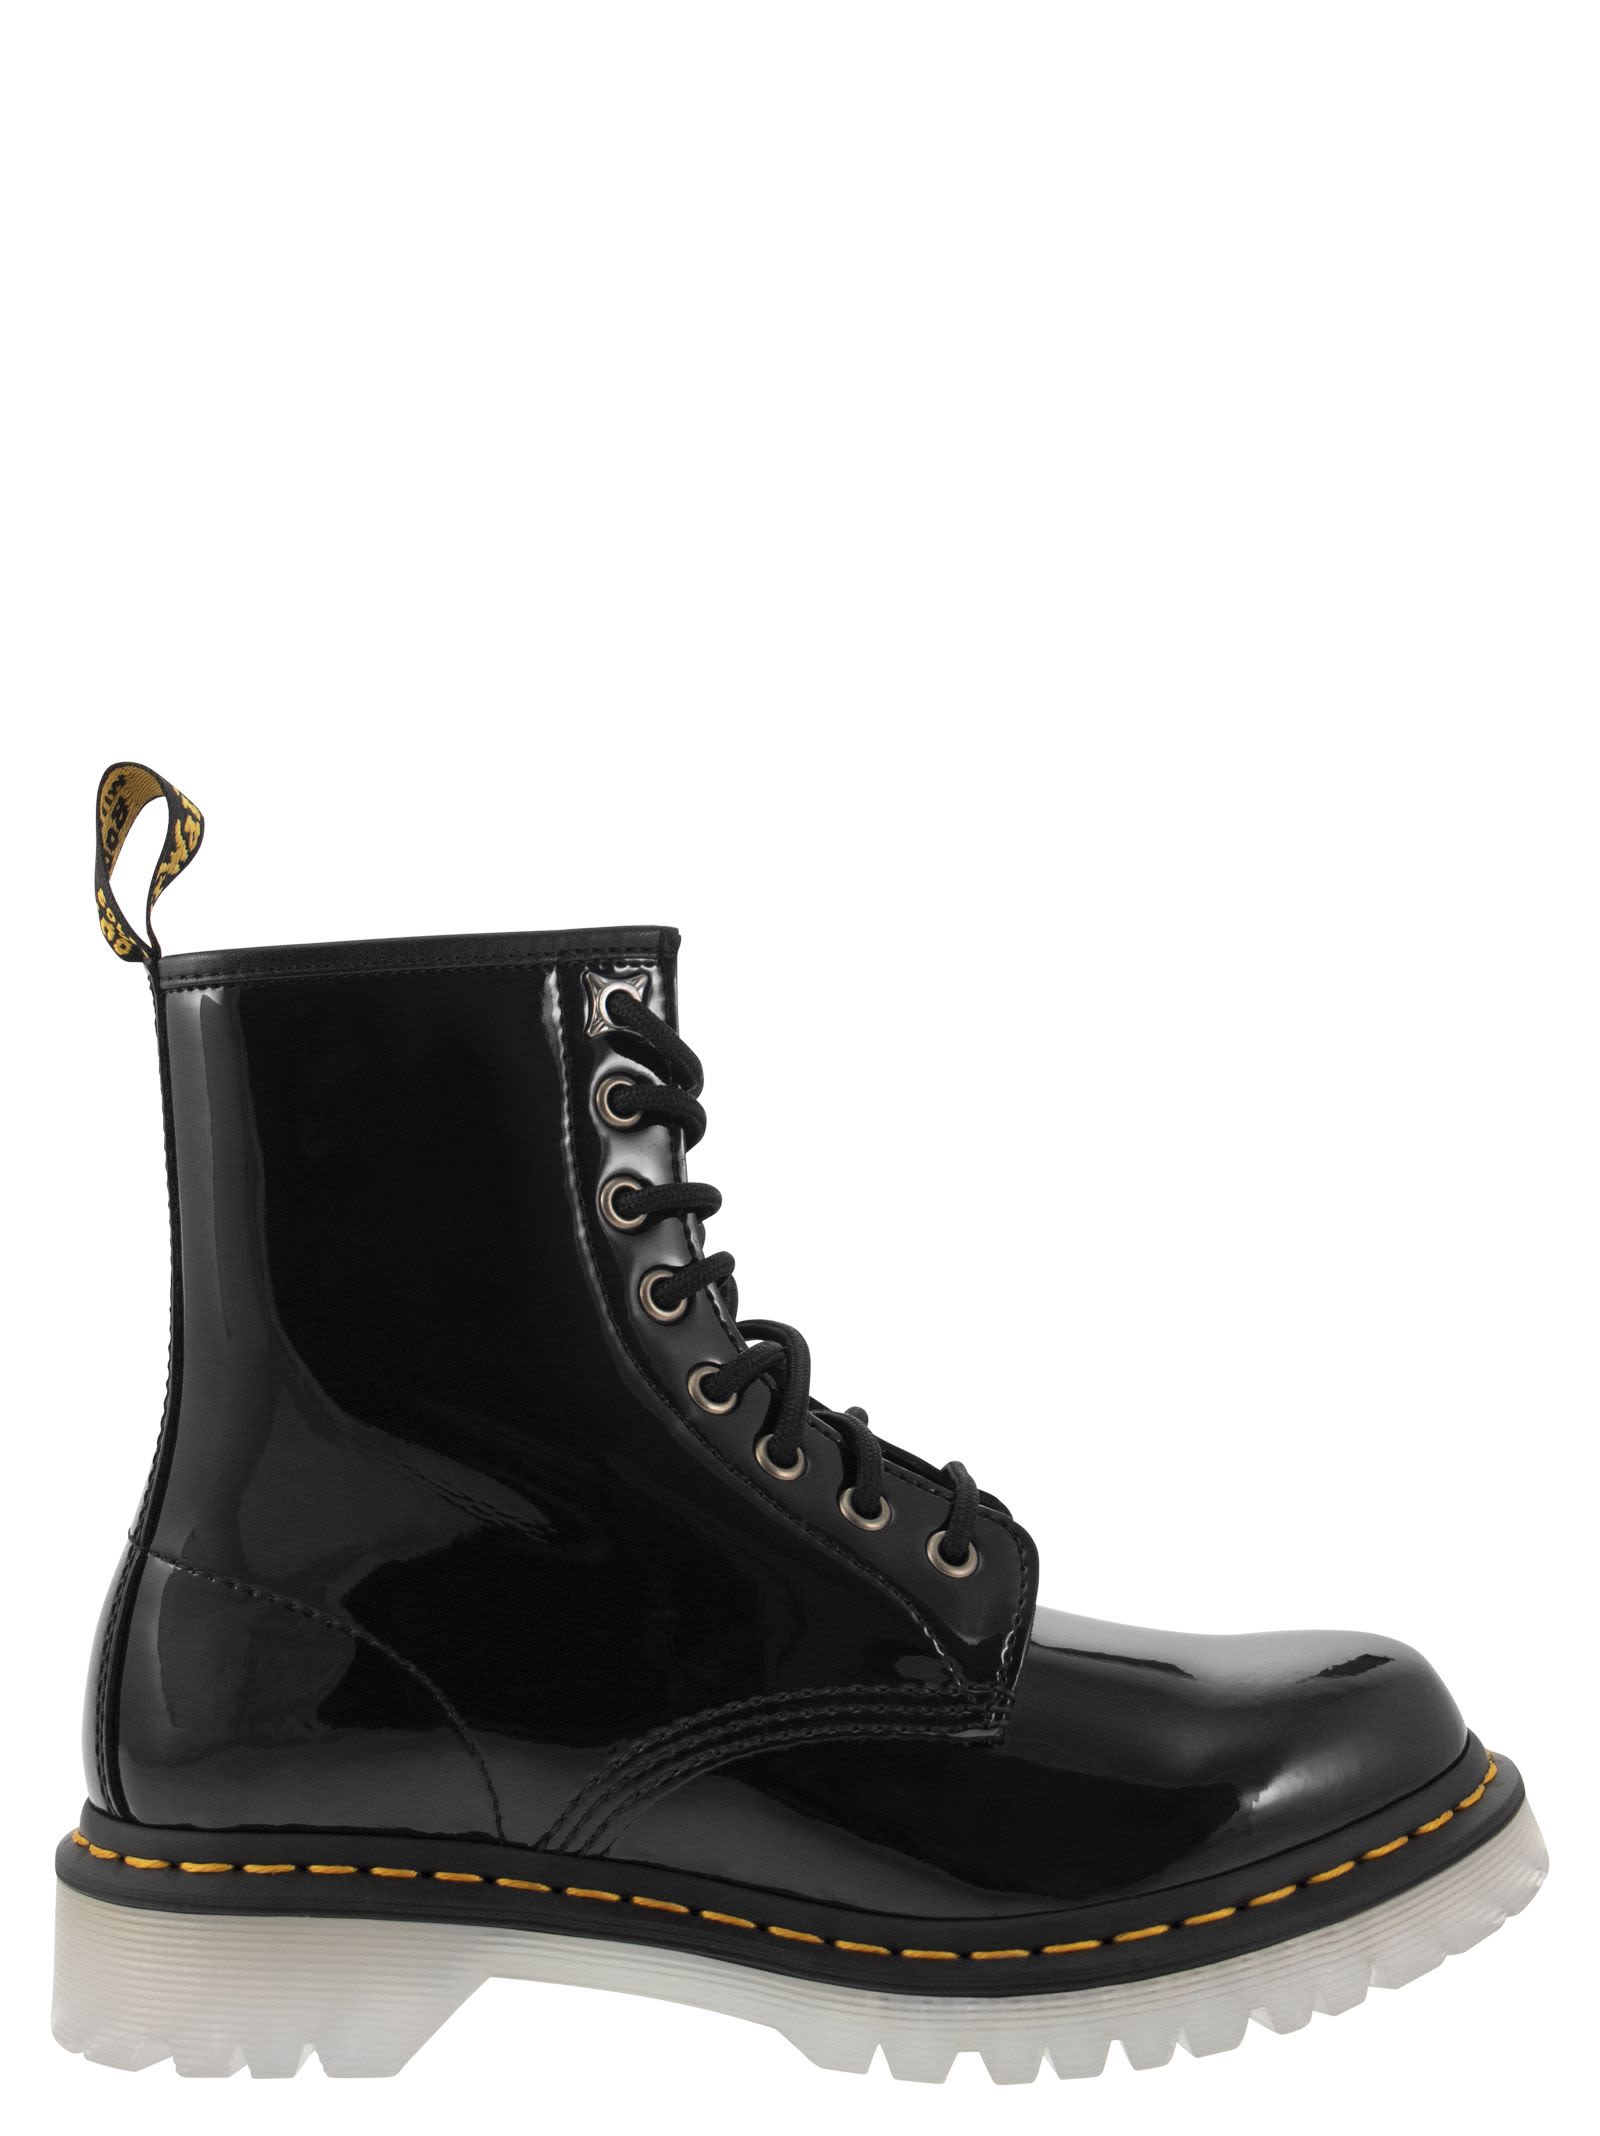 Dr. Martens 1460 Iced - Ankle Boot